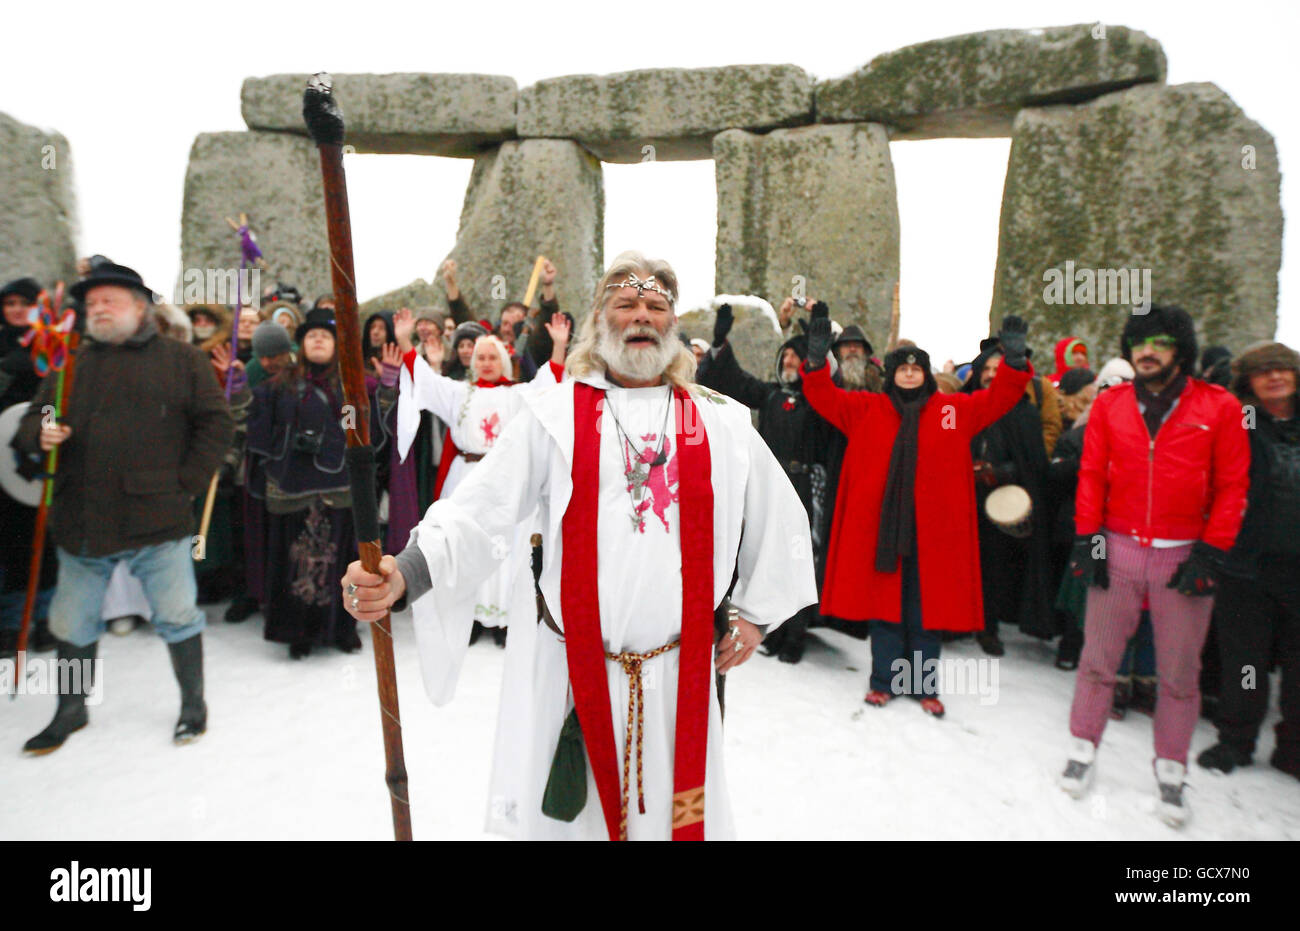 Winter solstice 2010. Druids, lead by Arthur Pendragon (centre), take part in the winter solstice at Stonehenge in Wiltshire. Stock Photo